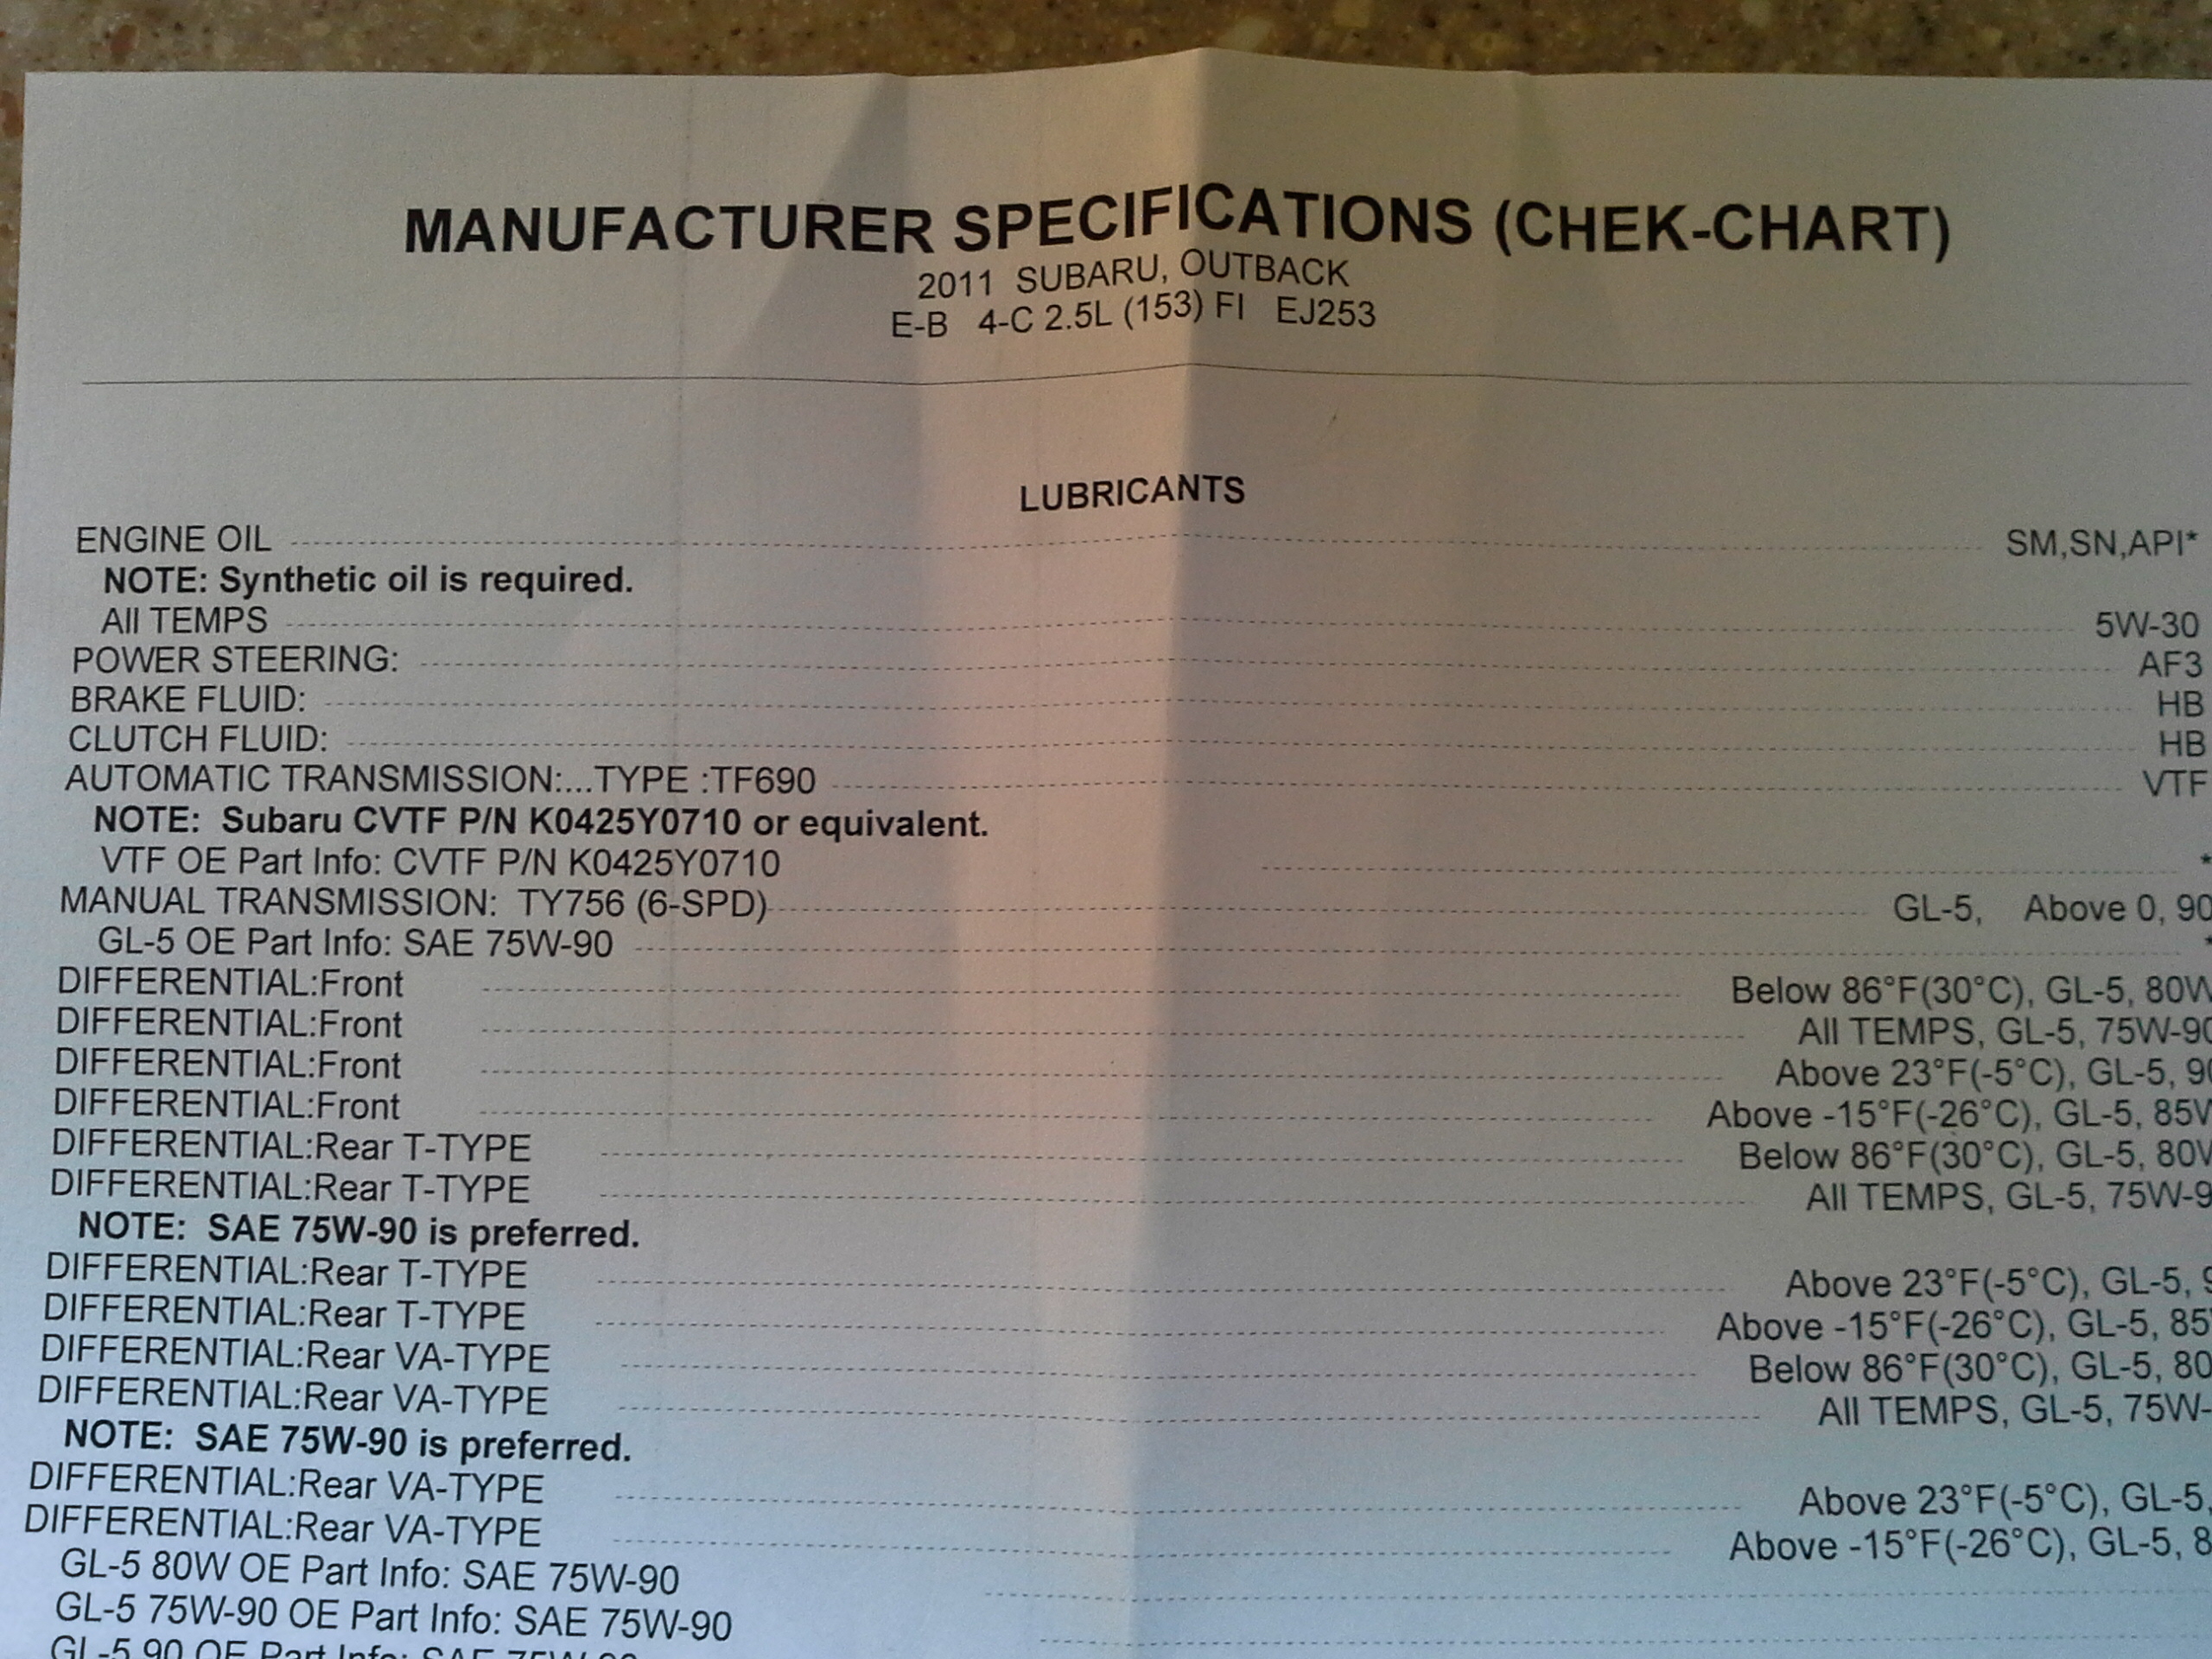 Manufacturer s Specifications